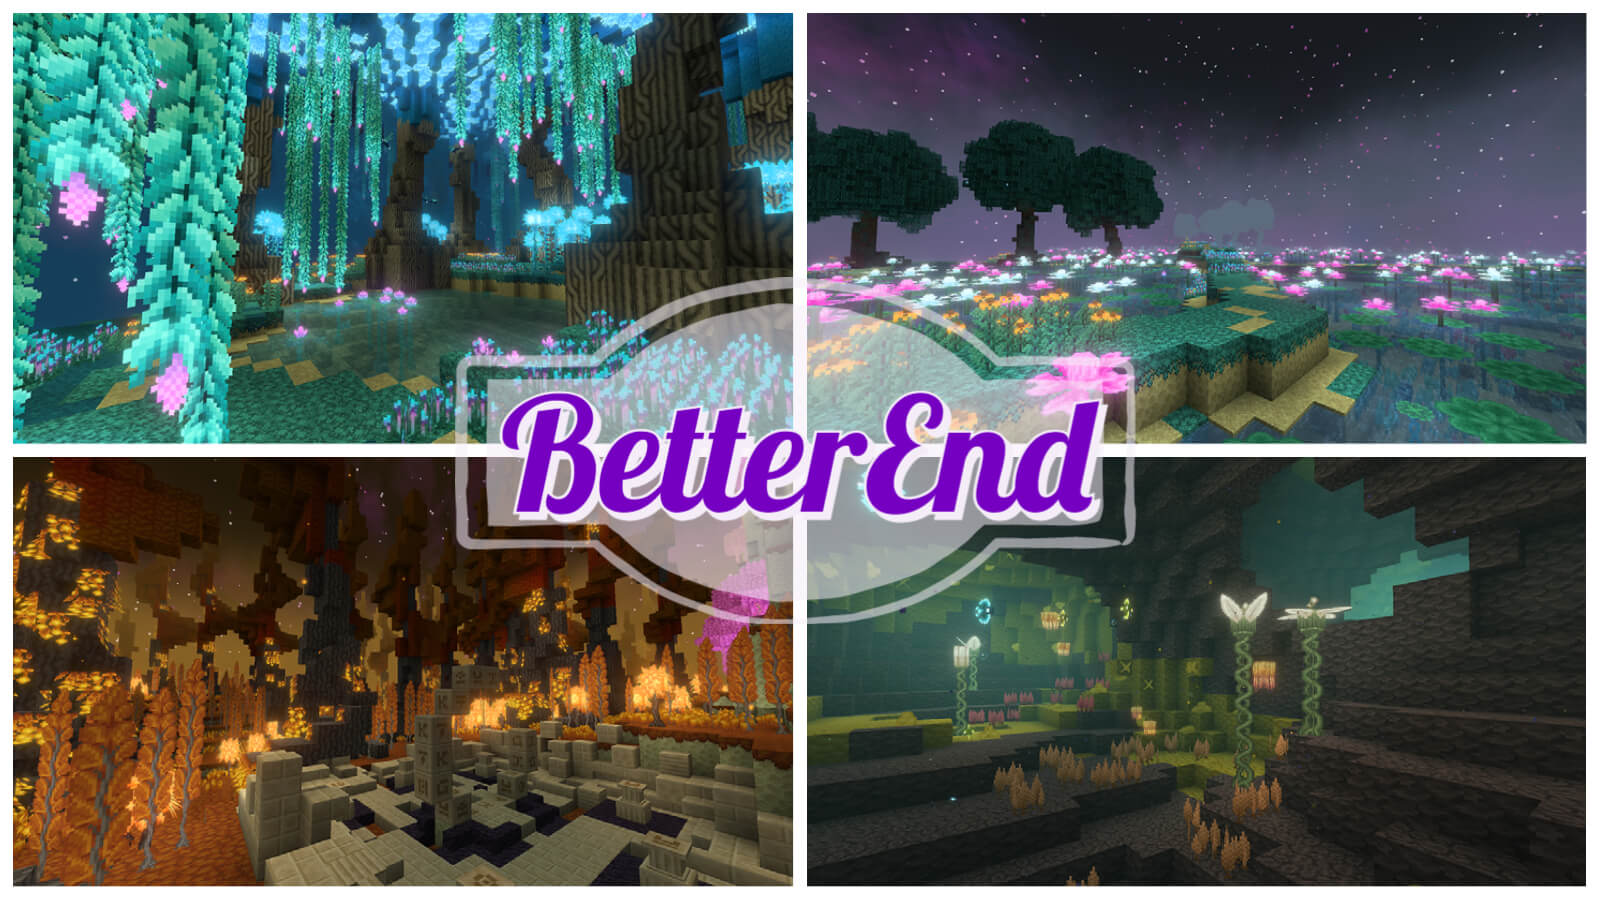 Download Better End Mod 1.16.4 and 1.16.3